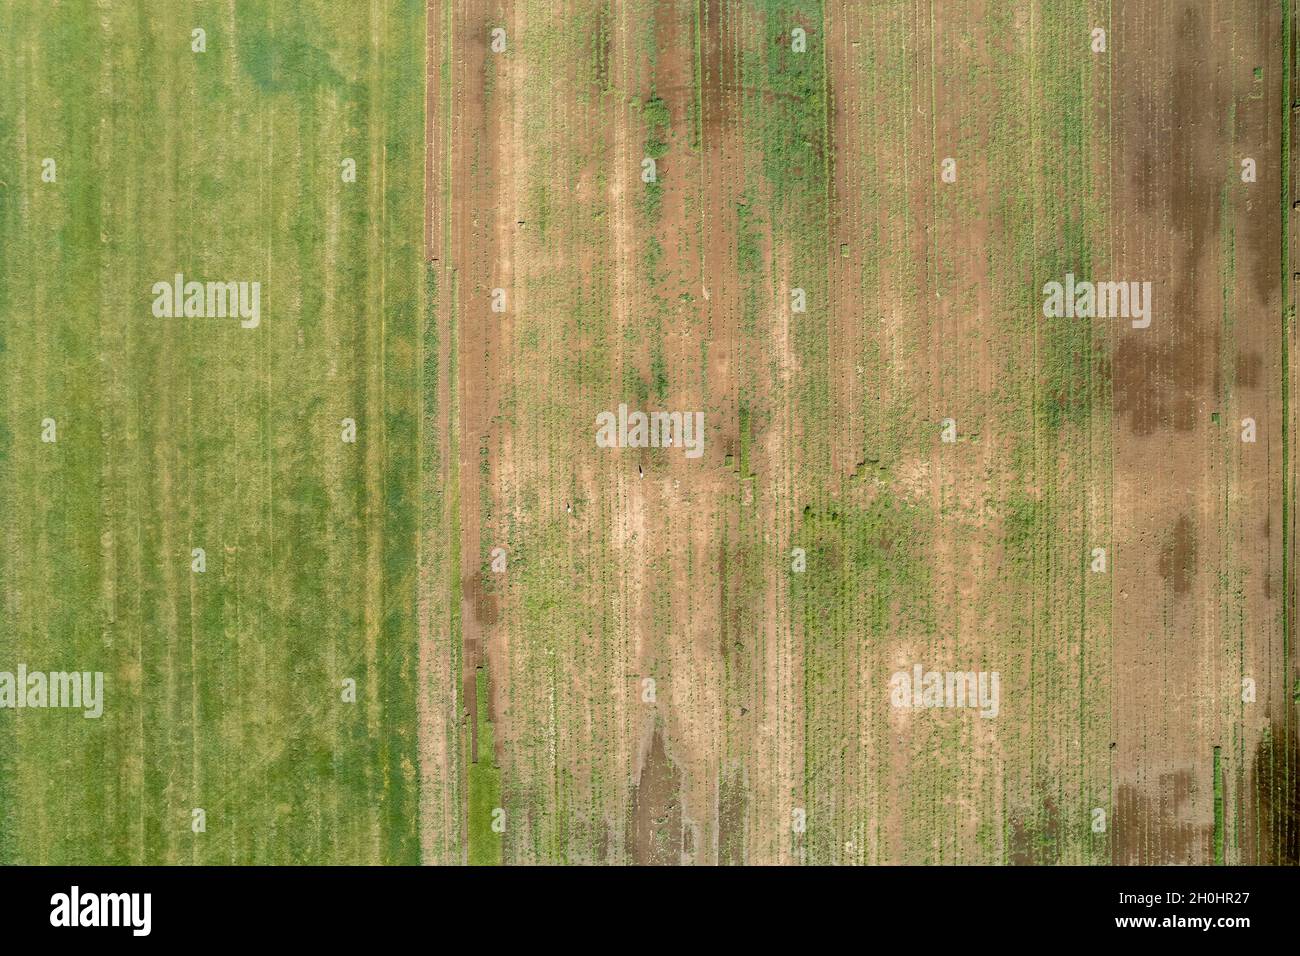 High aspect aerial looking down onto a lawn growing farm, grass for sale, textured abstract landscape pattern Stock Photo